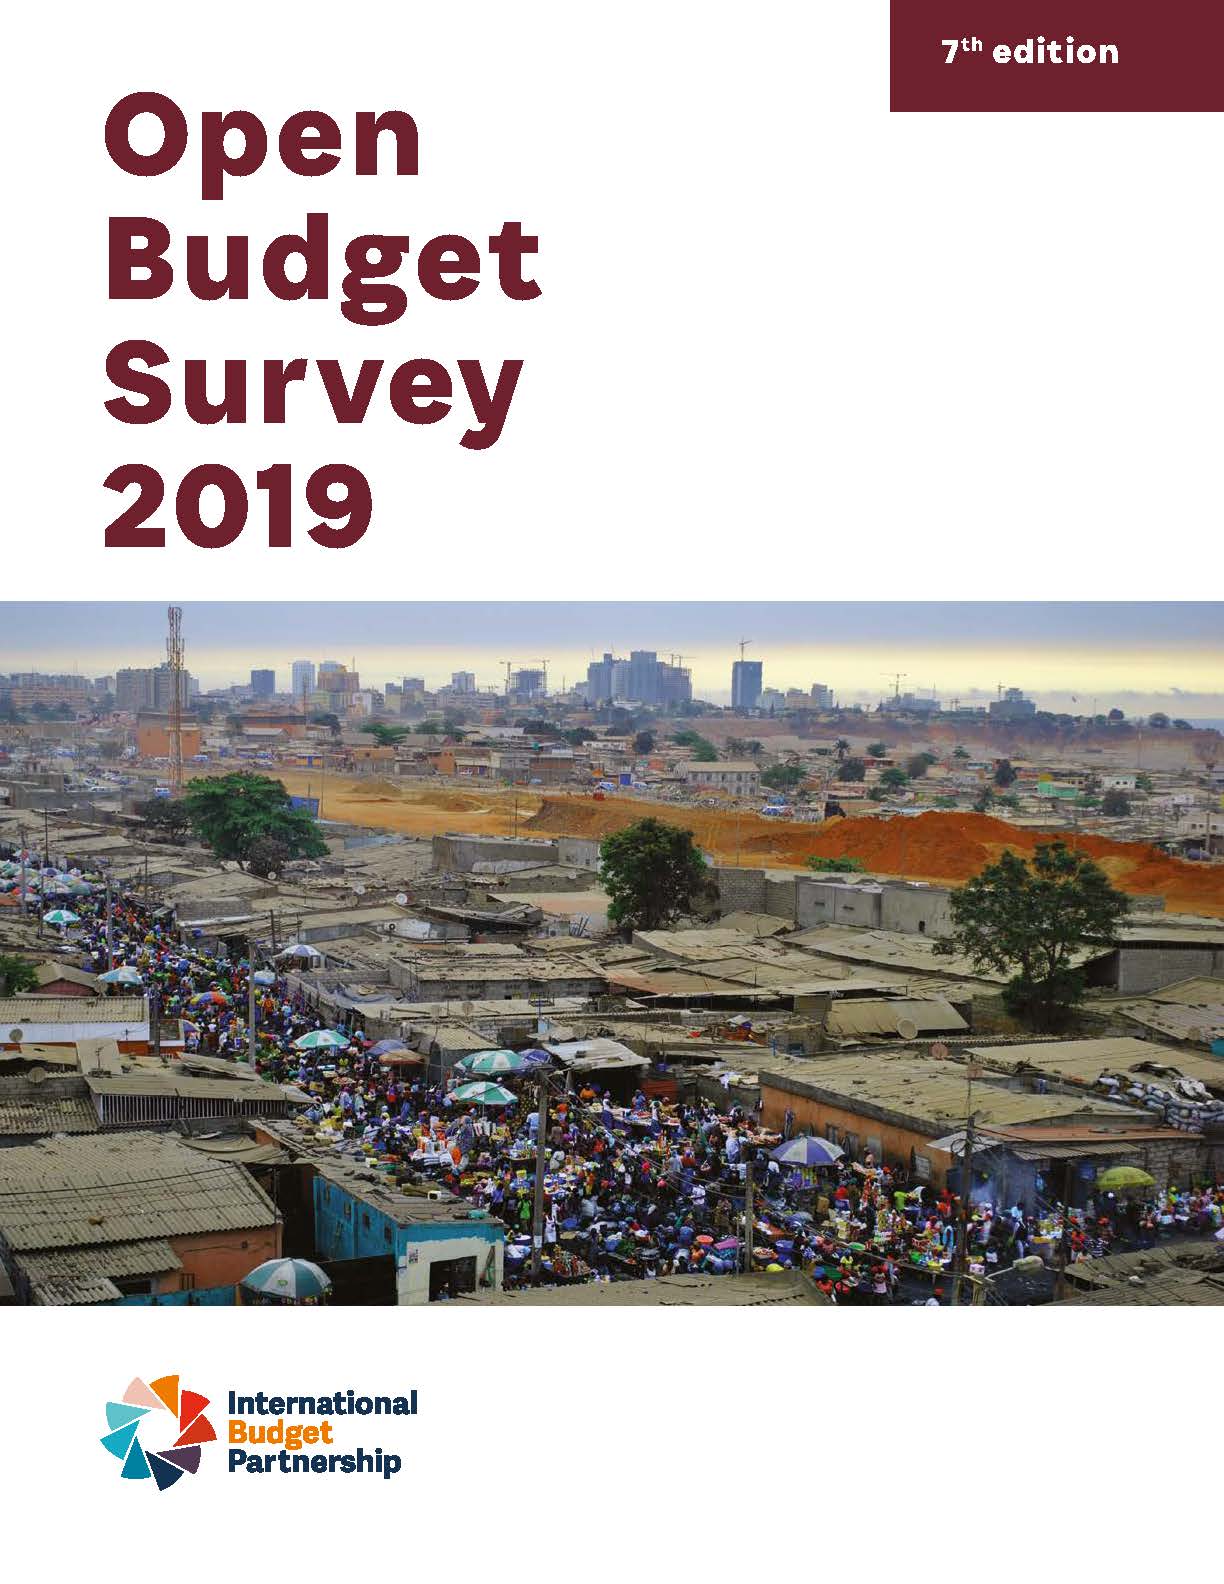 Not the most alluring of tasks: reforming Canada’s fiscal practices, lessons from the Open Budget Survey (OBS) 2019